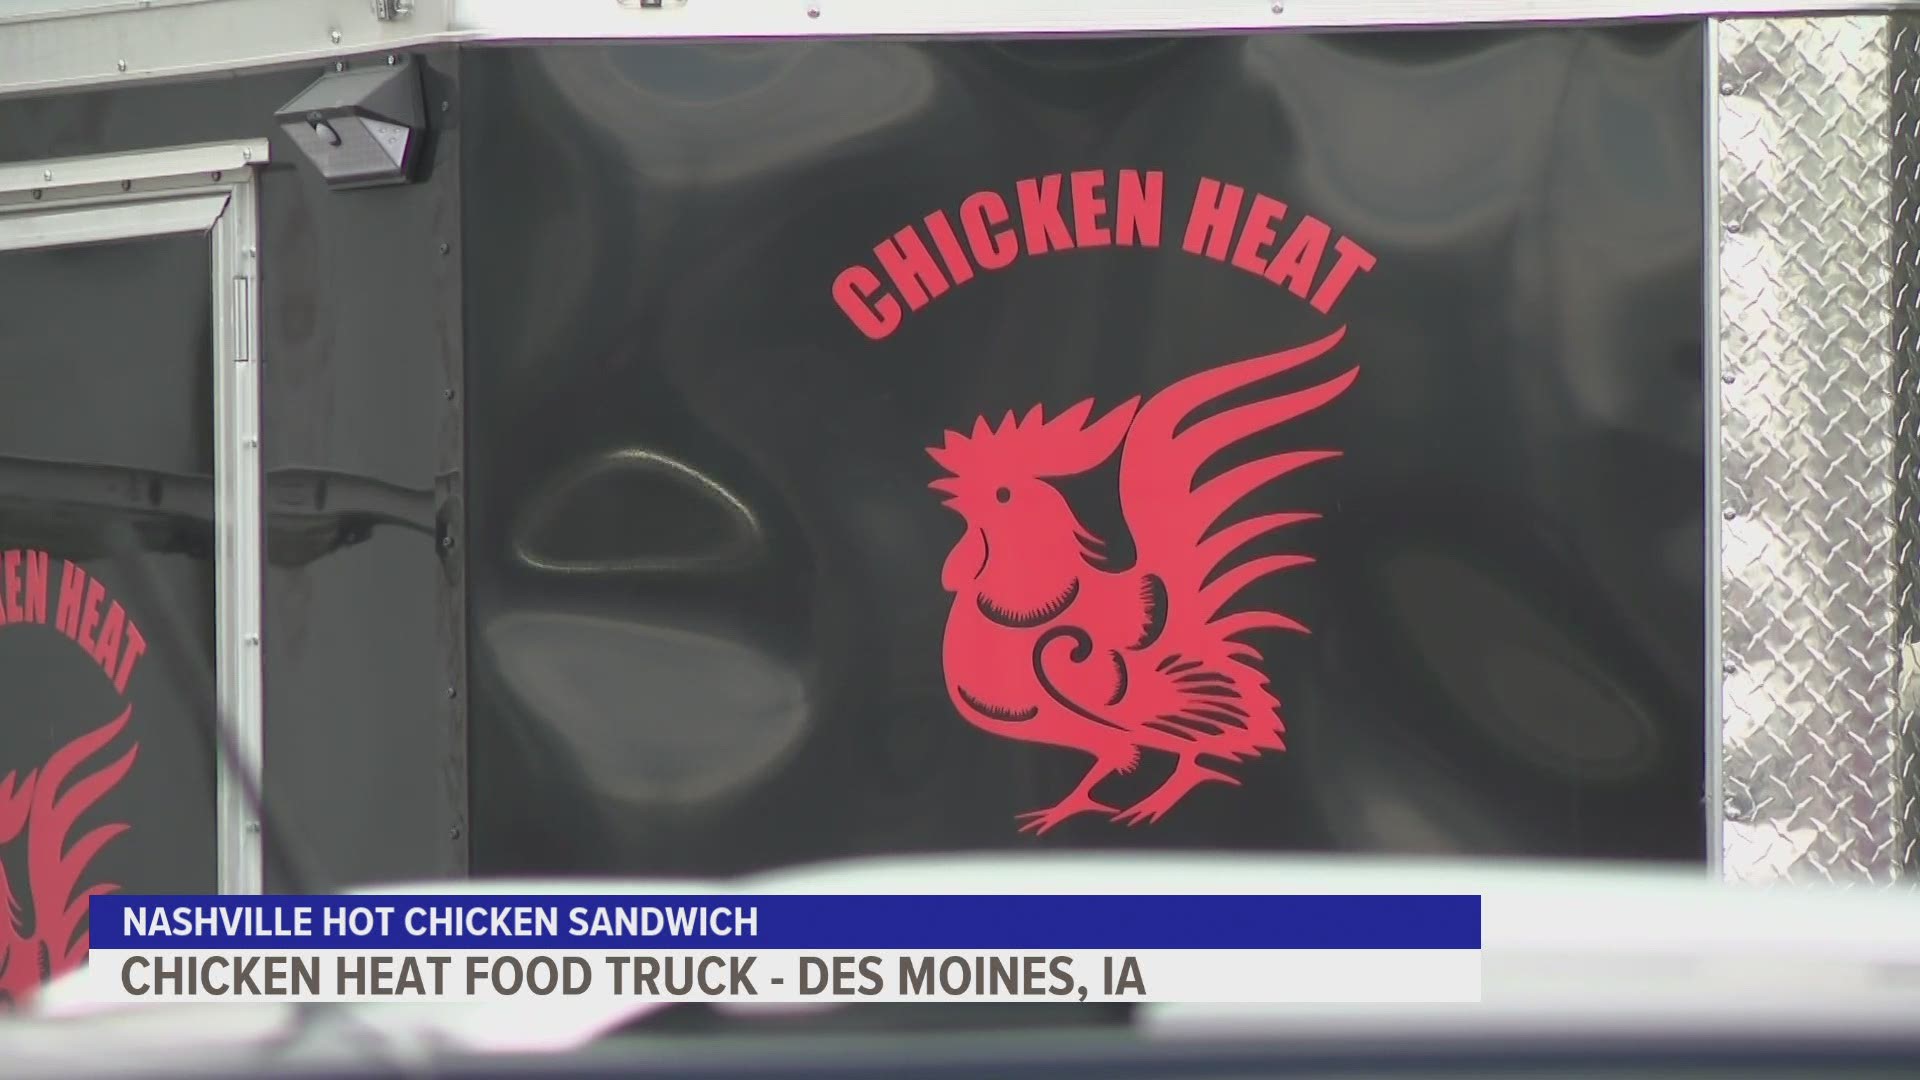 Grilled or fried, on a bun or a biscuit. What makes the best chicken sandwich? While the debate rages on, one Iowa food truck shows its recipe for success.